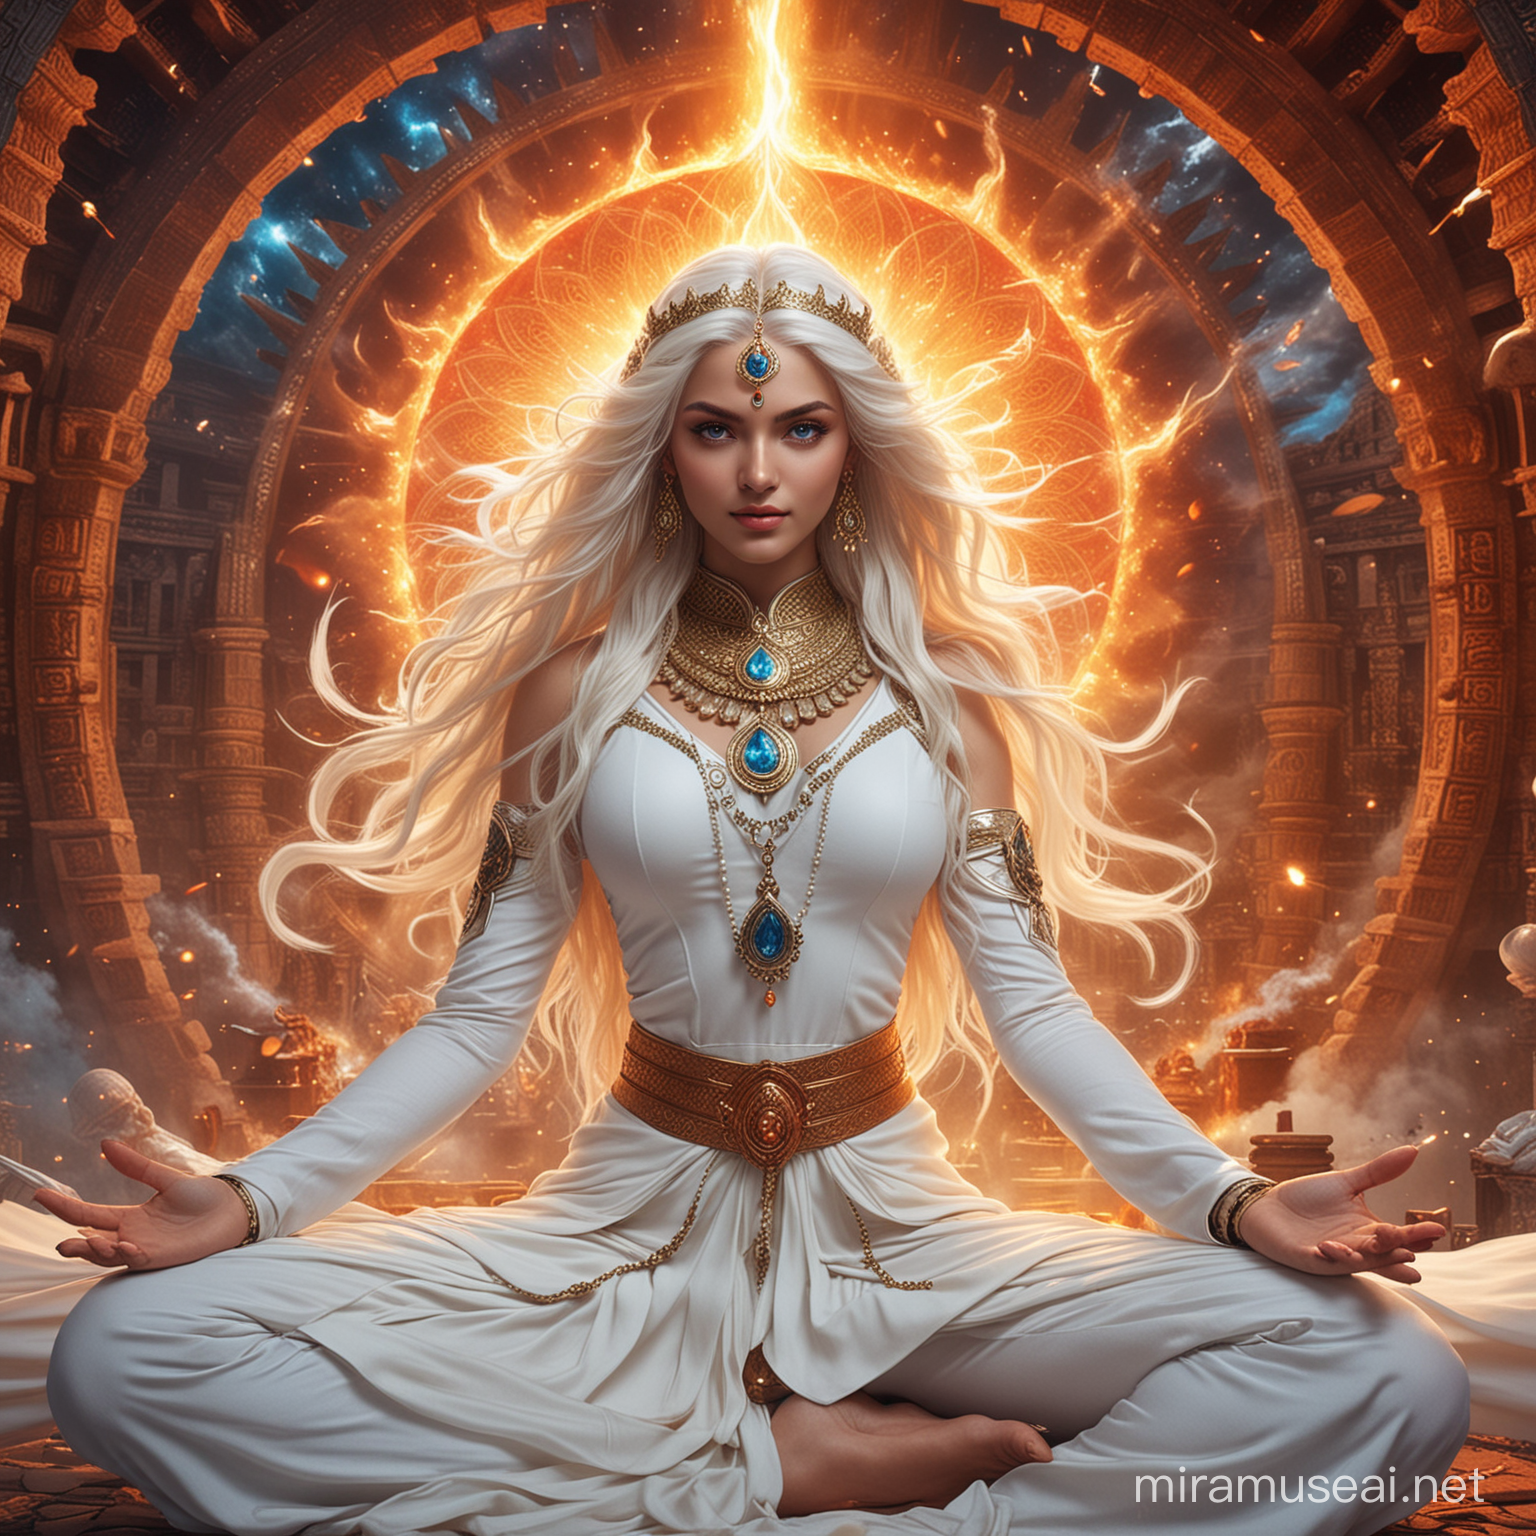 Young Empress Goddess Surrounded by Cosmic Energy and Hindu Deities in Lotus Position